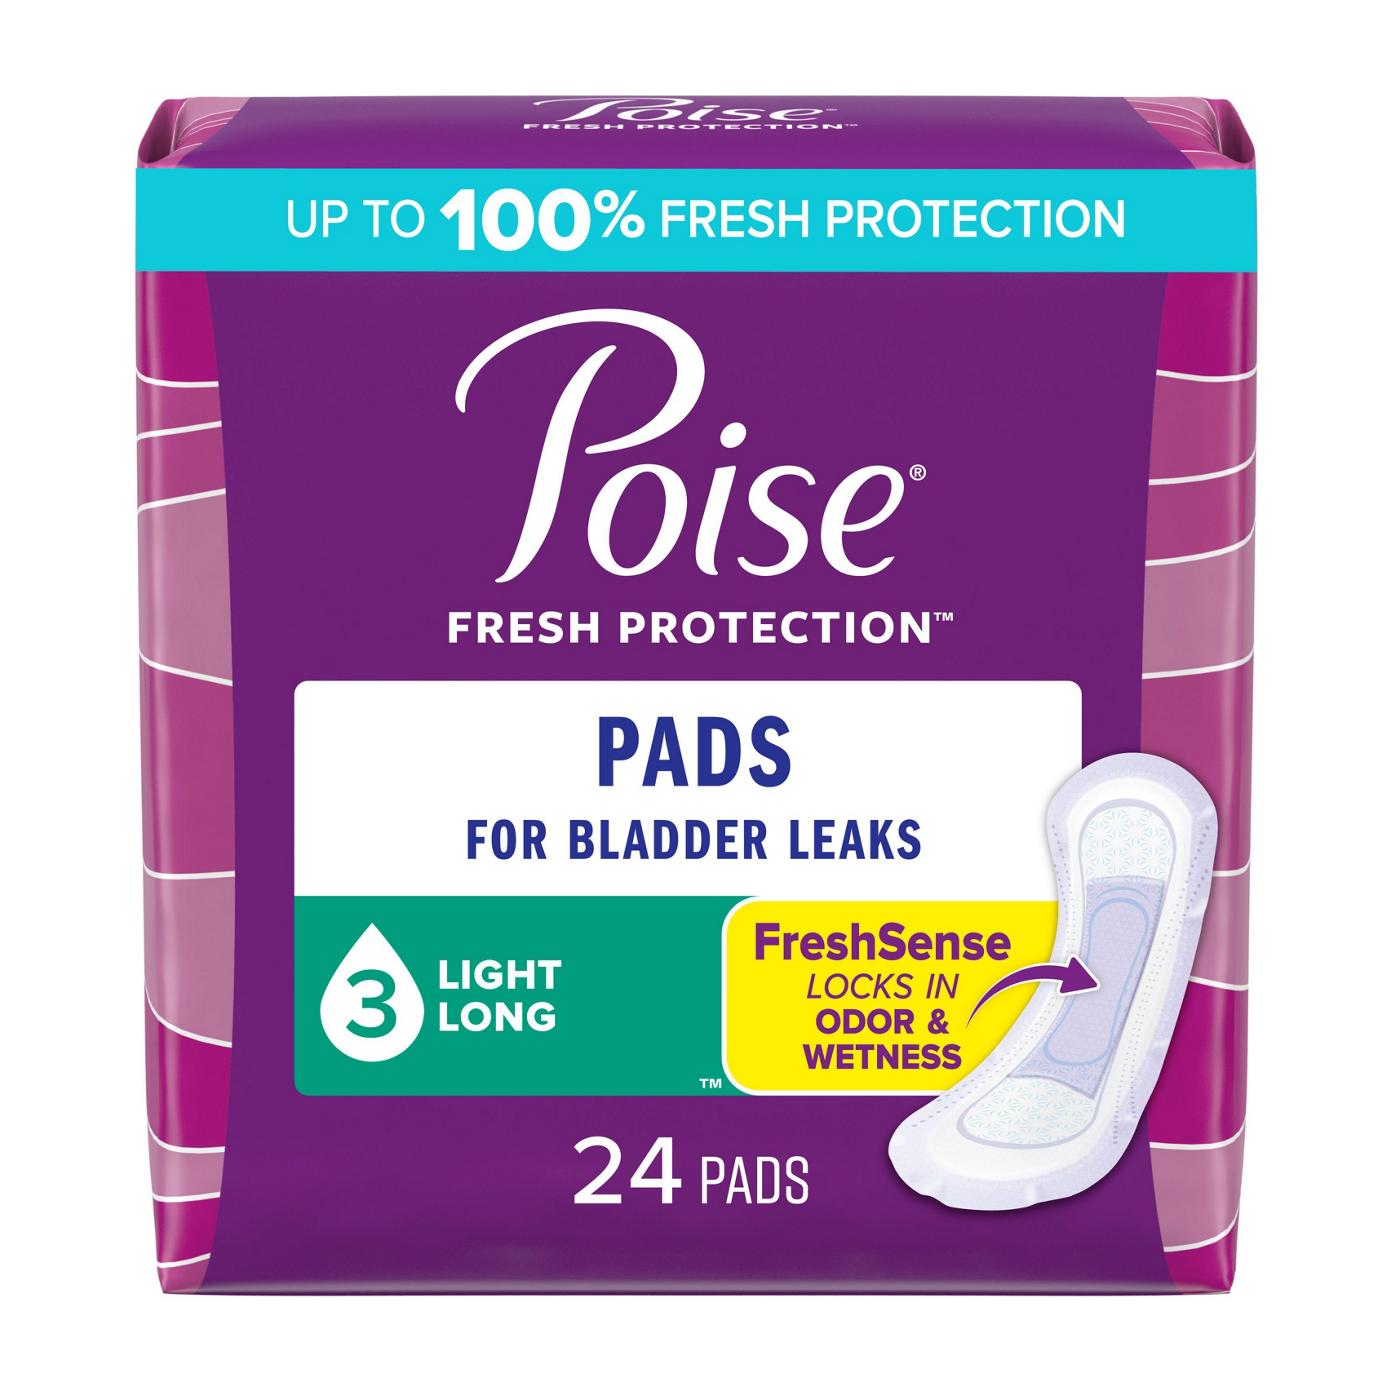 Poise Long Incontinence & Postpartum Pads - Light; image 1 of 6